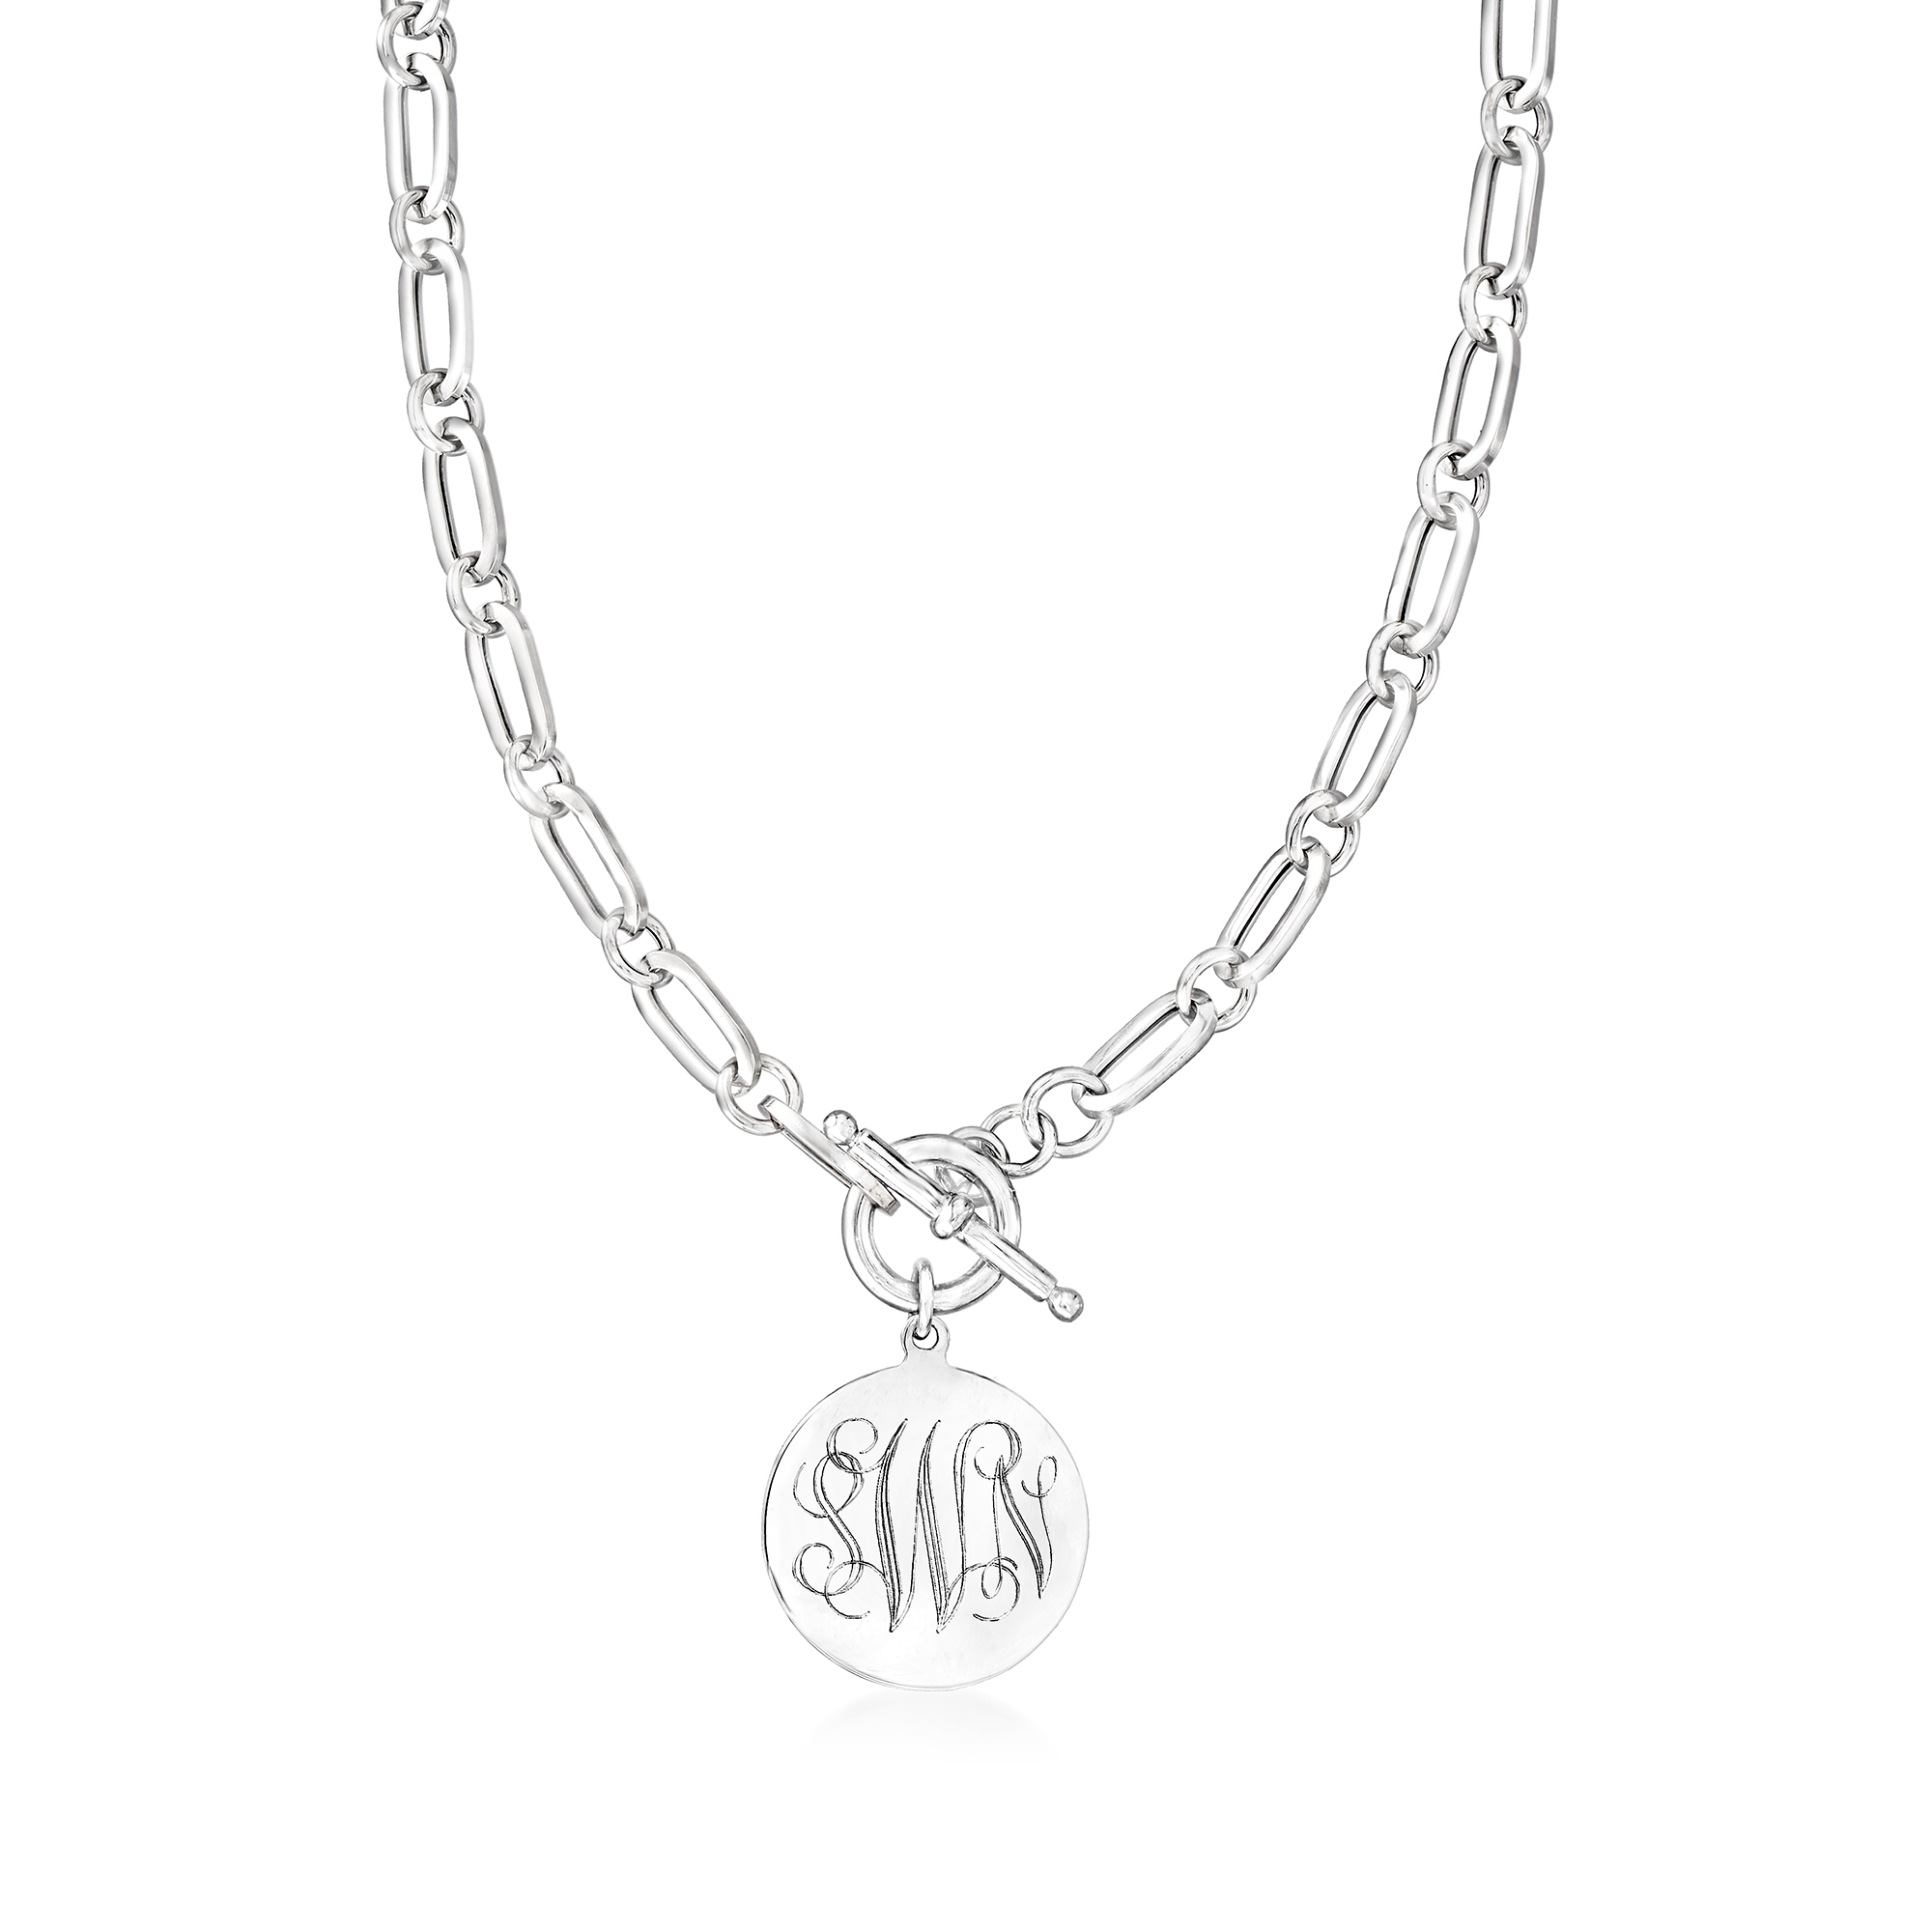 Keti Sorely Designs Sterling Silver Monogram Necklace on Toggle Chain 16 inch